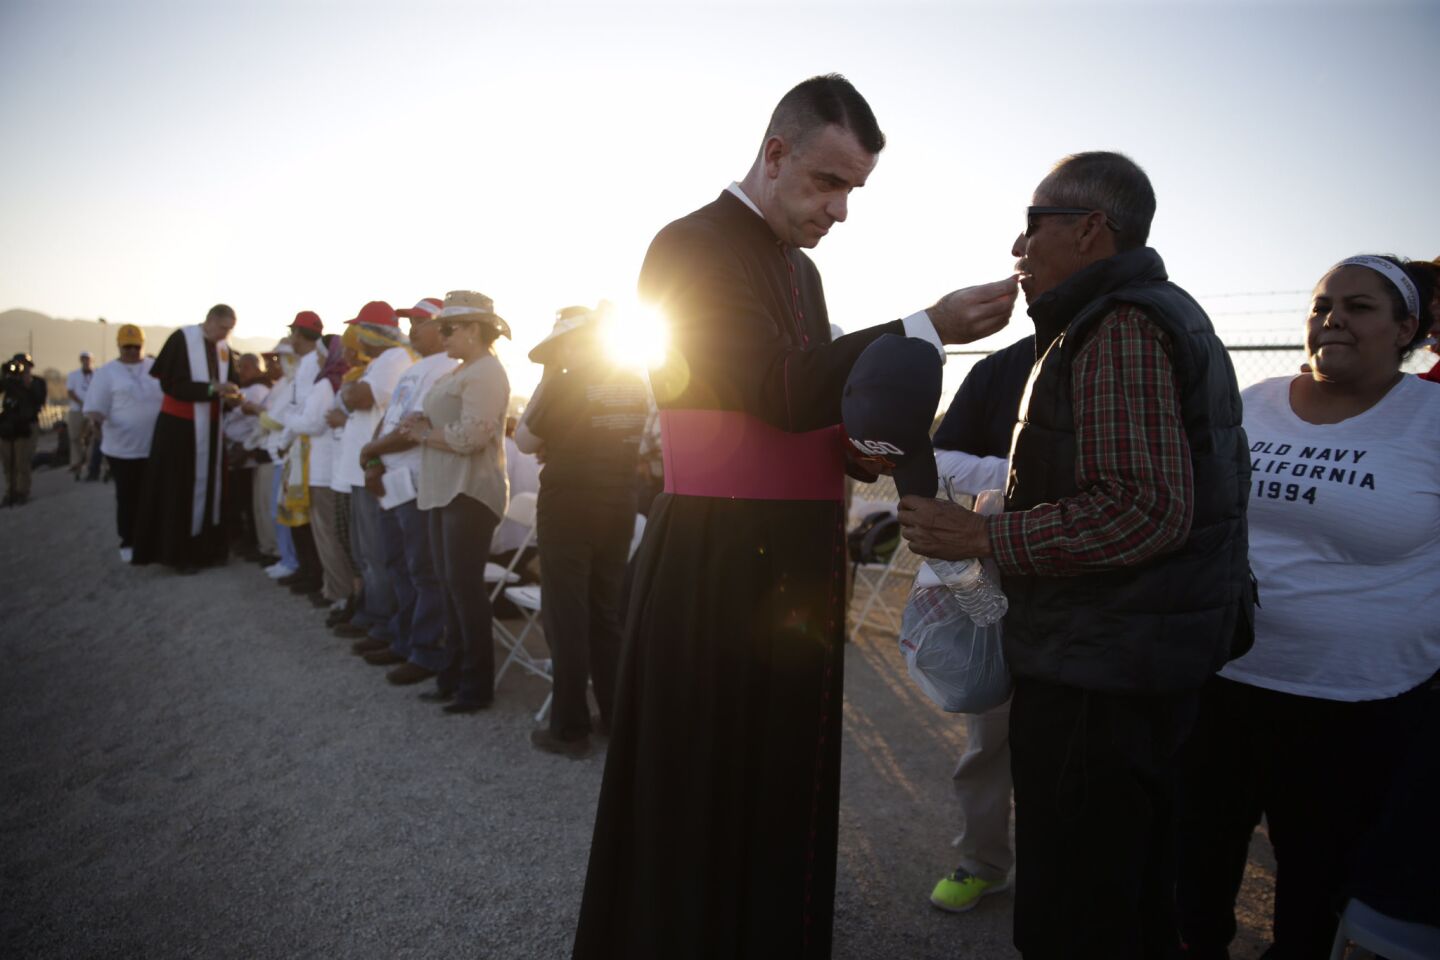 Msgr. James Brownfield gives communion at the levee in El Paso, Texas, near Ciudad Juarez, Mexico, on Wednesday during a Mass celebrated by Pope Francis on the Mexican side of the border.